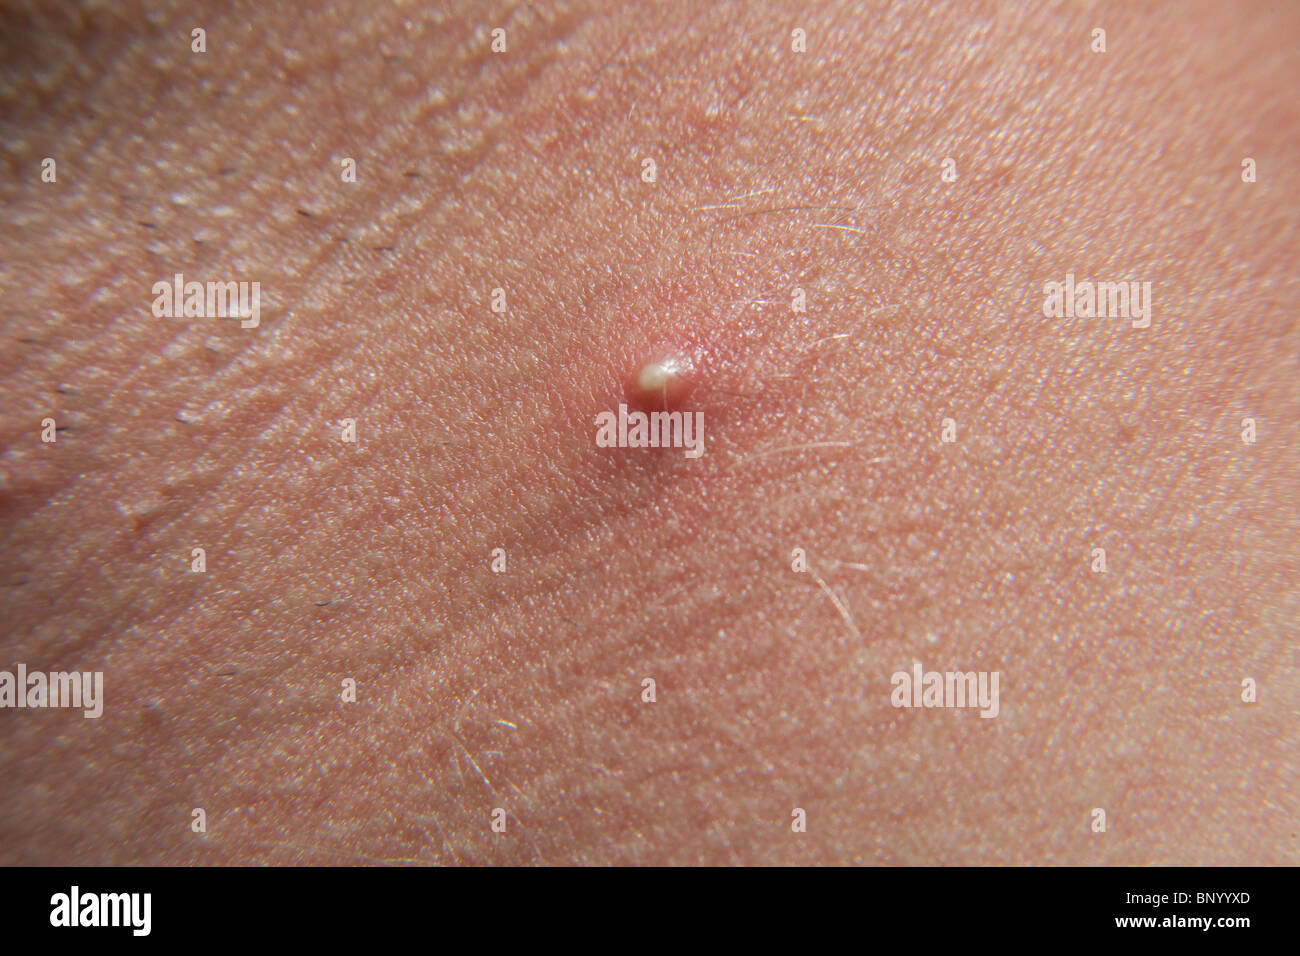 Large acne spot or pimple on a mans neck. Stock Photo